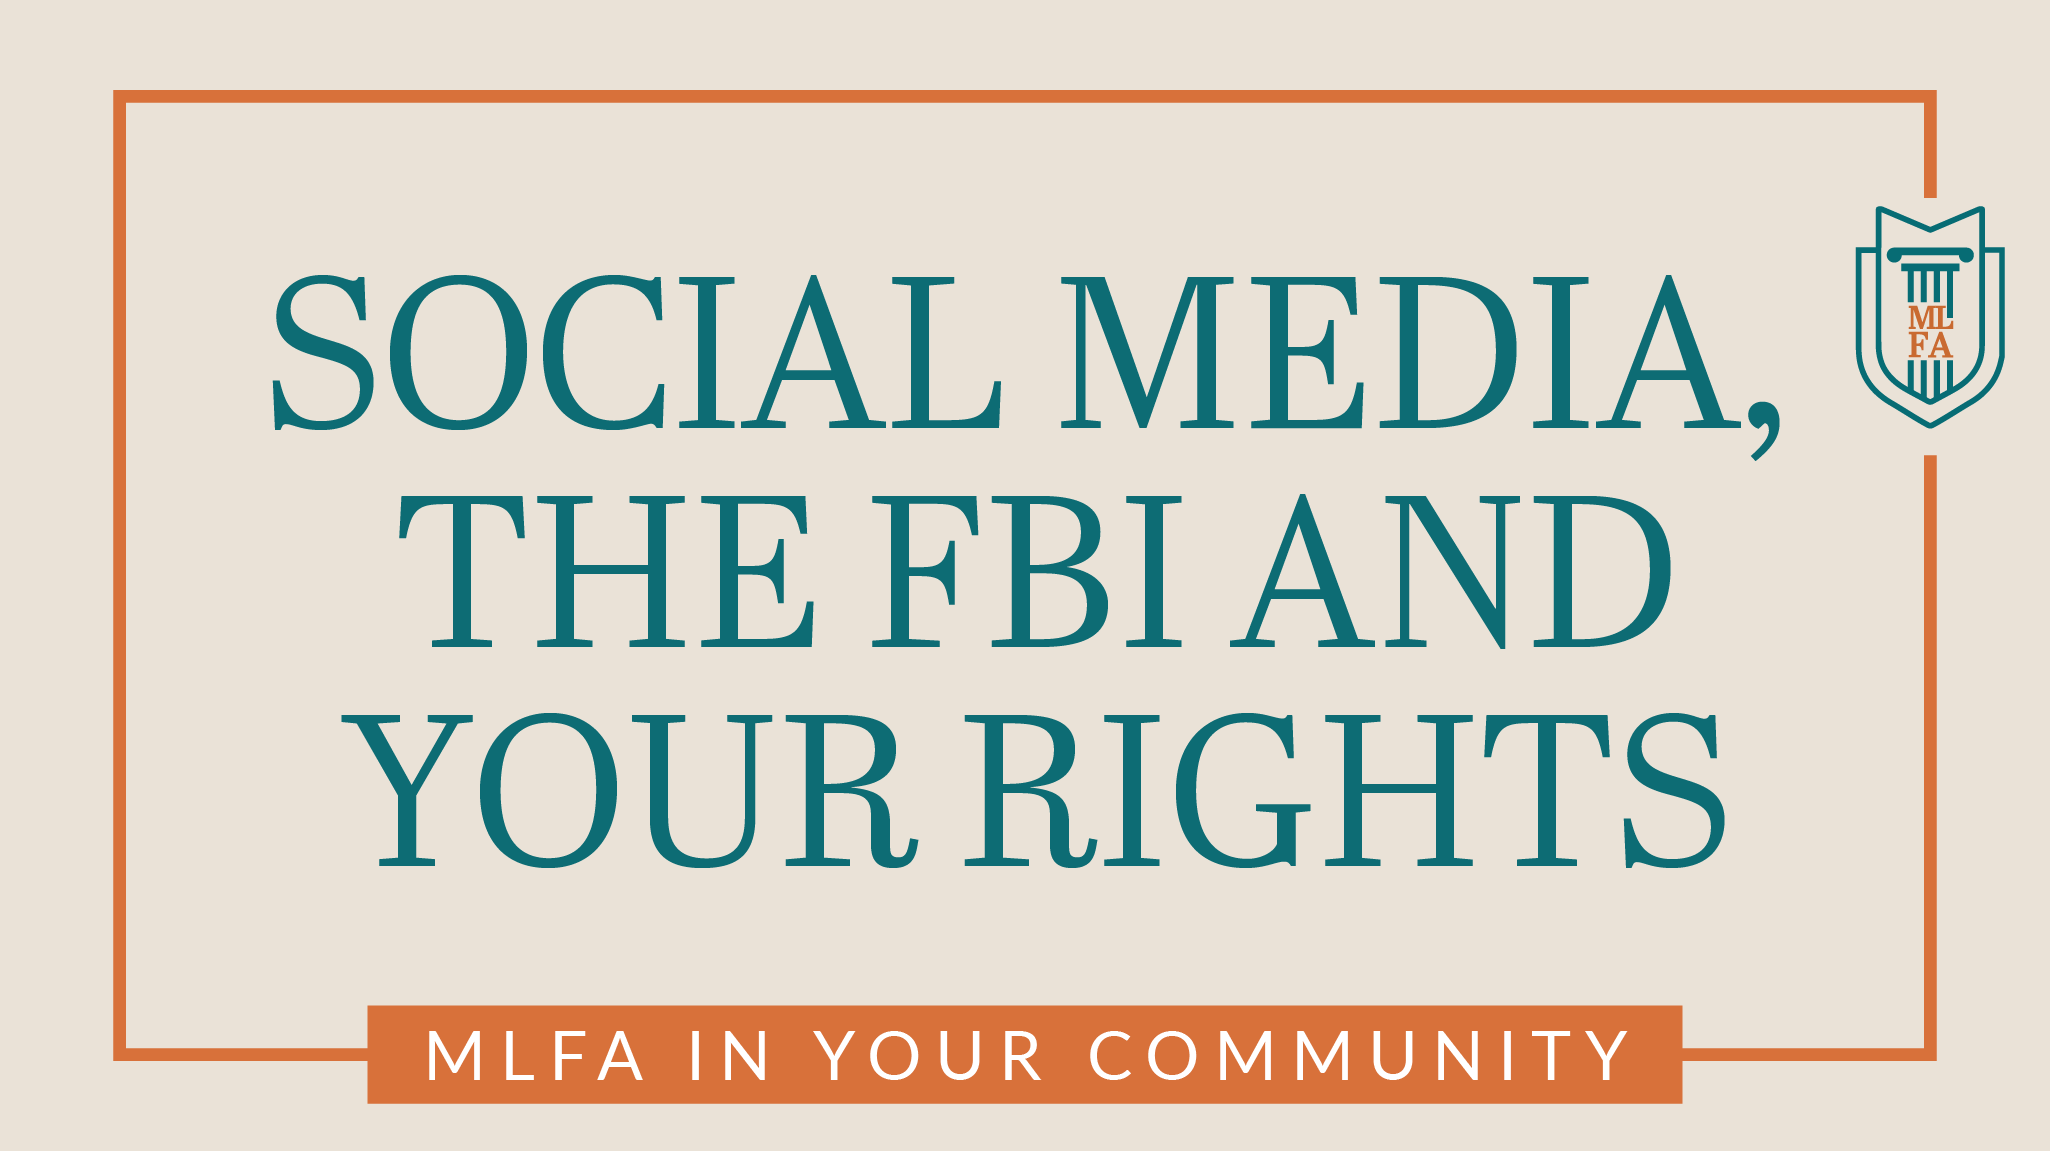 Social Media, the FBI and Your Rights - presentation